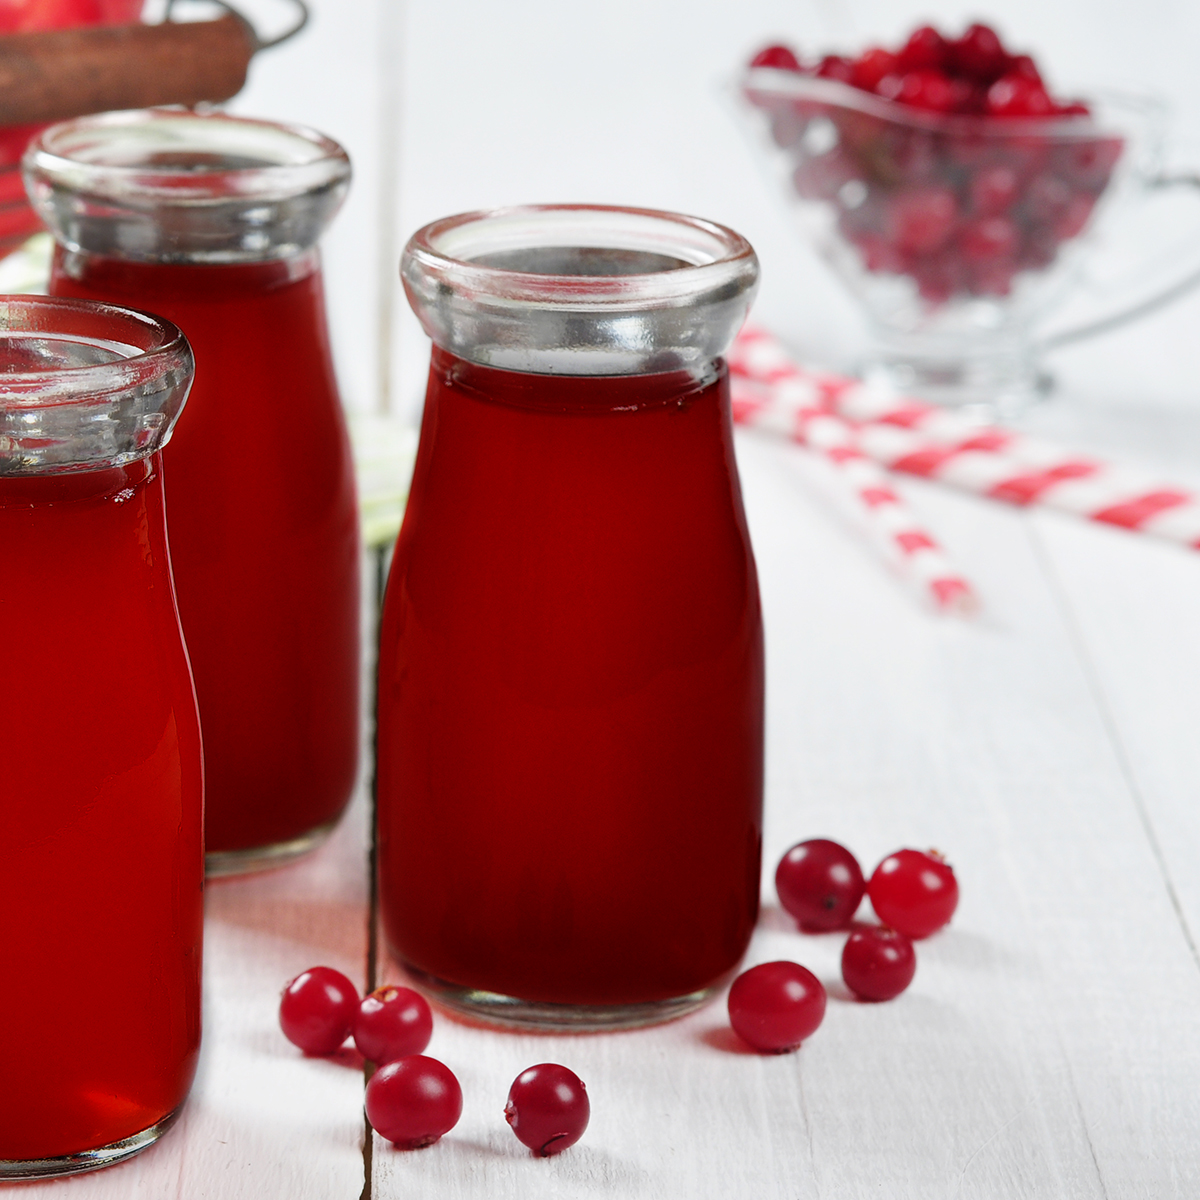 Does Cranberry Juice Help With Kidney Stones? 